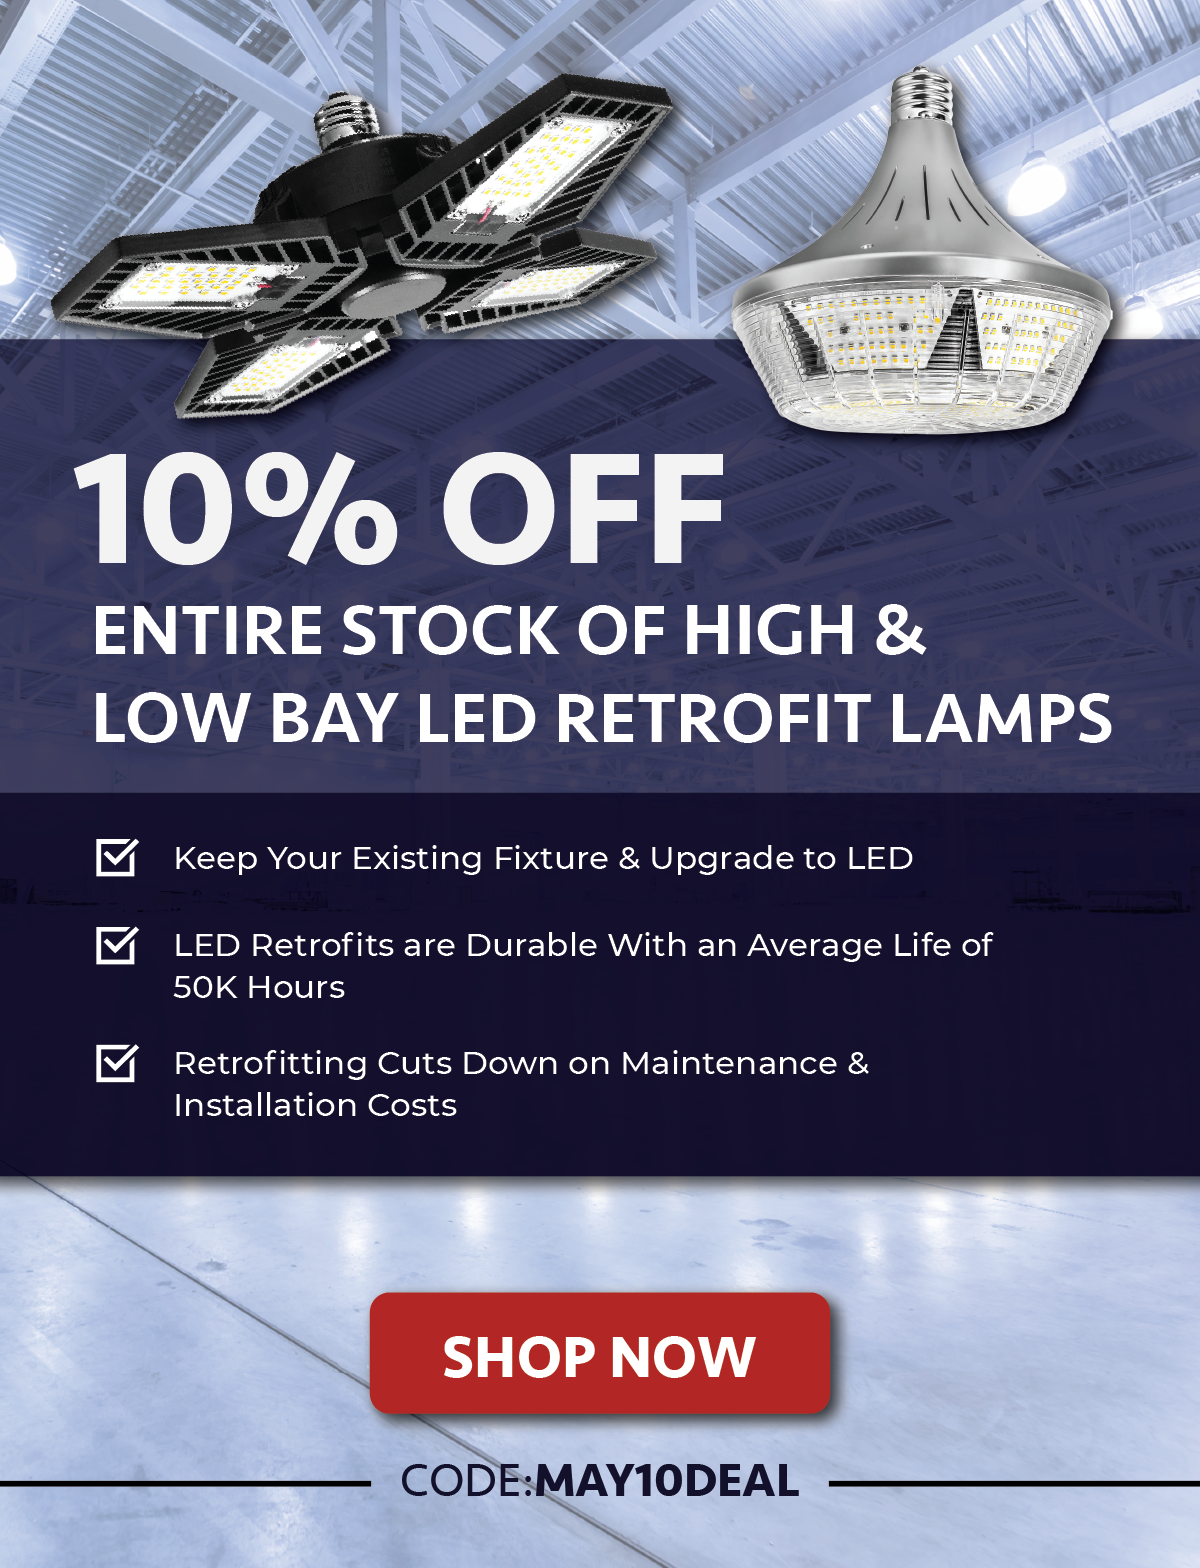 10% Off Entire Stock of High & Low Bay LED Retrofit Lamps